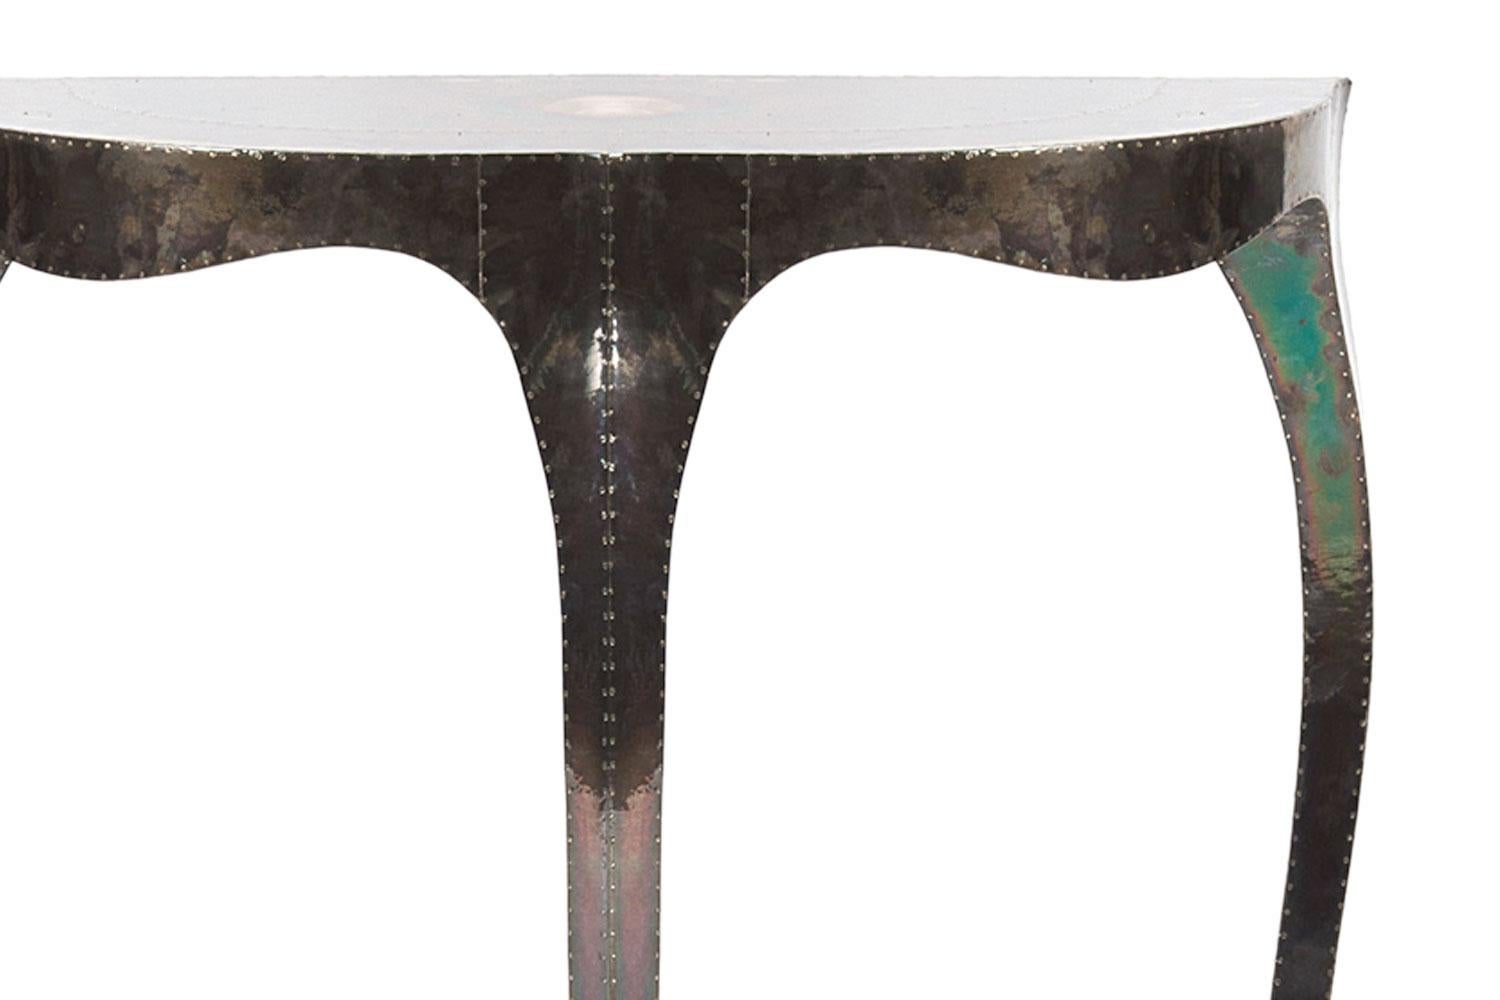 Silver Clad Louise demi lune console table by Stephanie Odegard

This console table is handmade and has a solid teakwood frame that is clad in silver and is part of the Stephanie Odegard Collection. This functional table is a great side table and